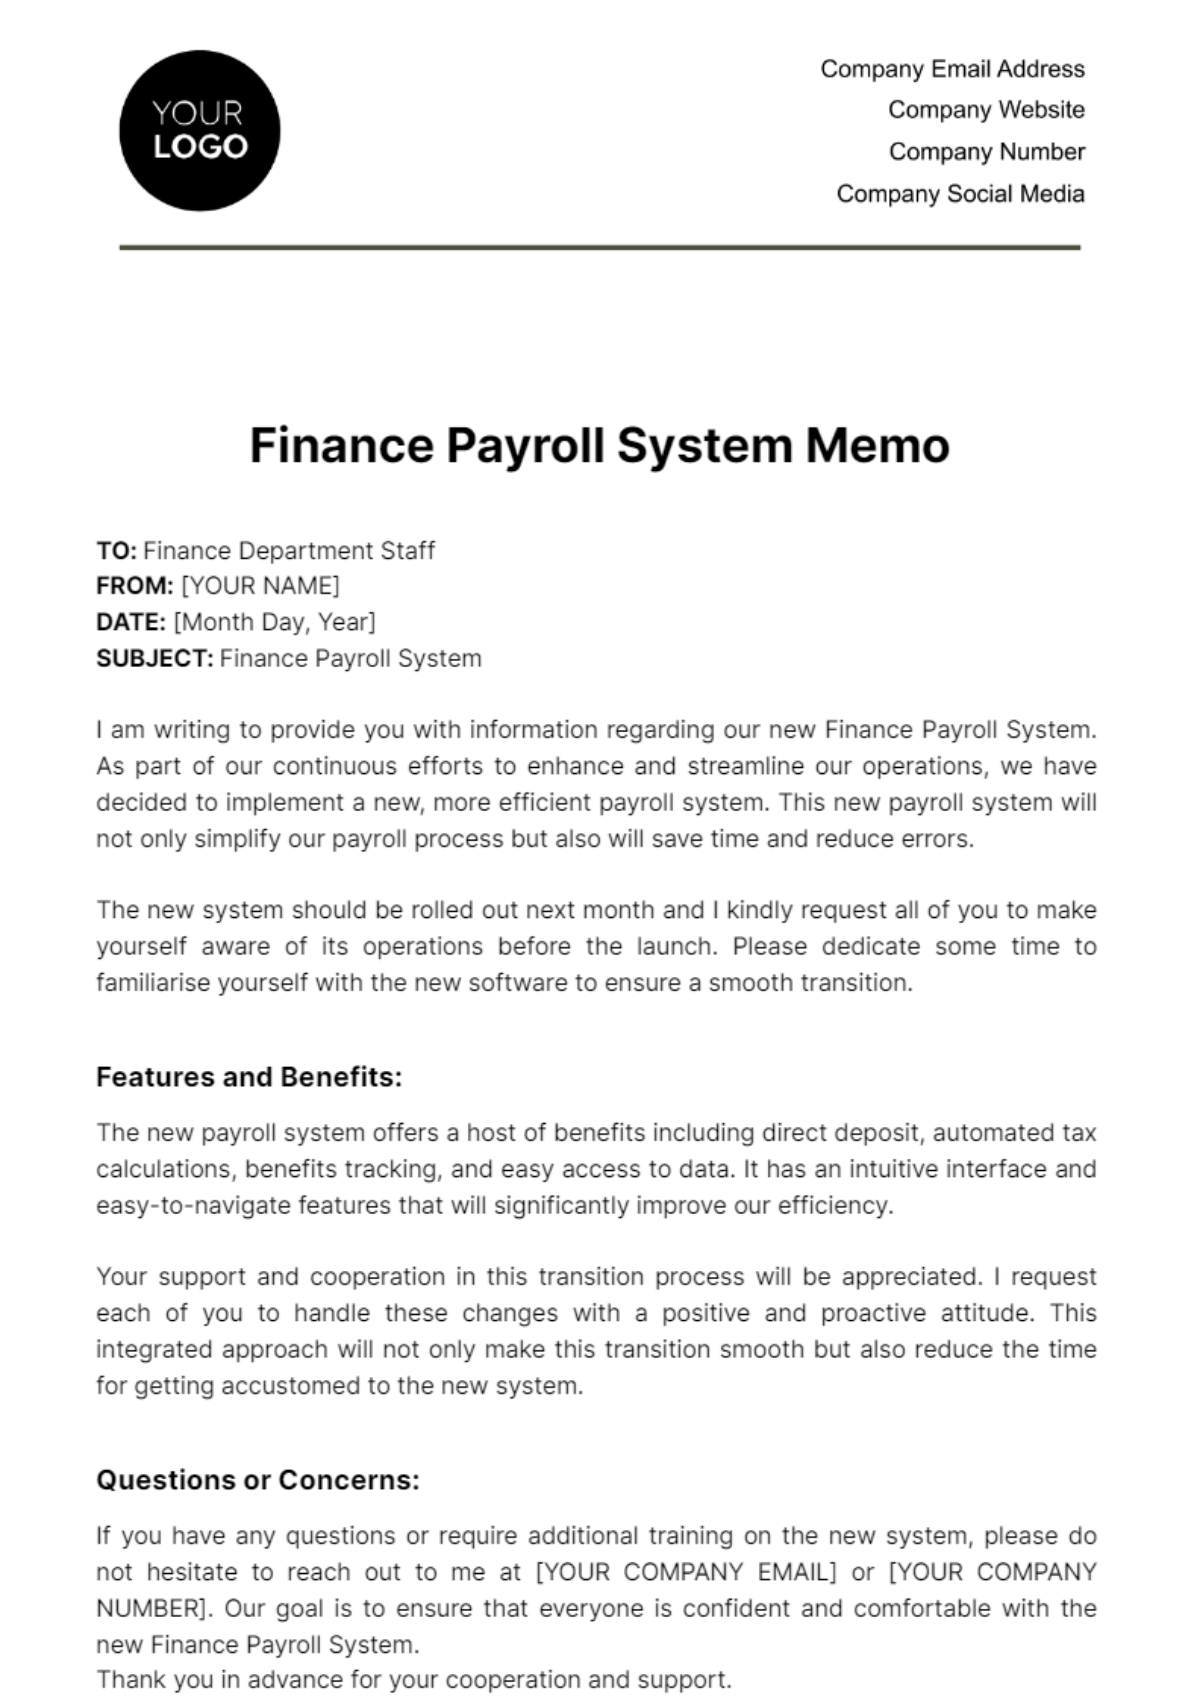 Free Finance Payroll System Memo Template